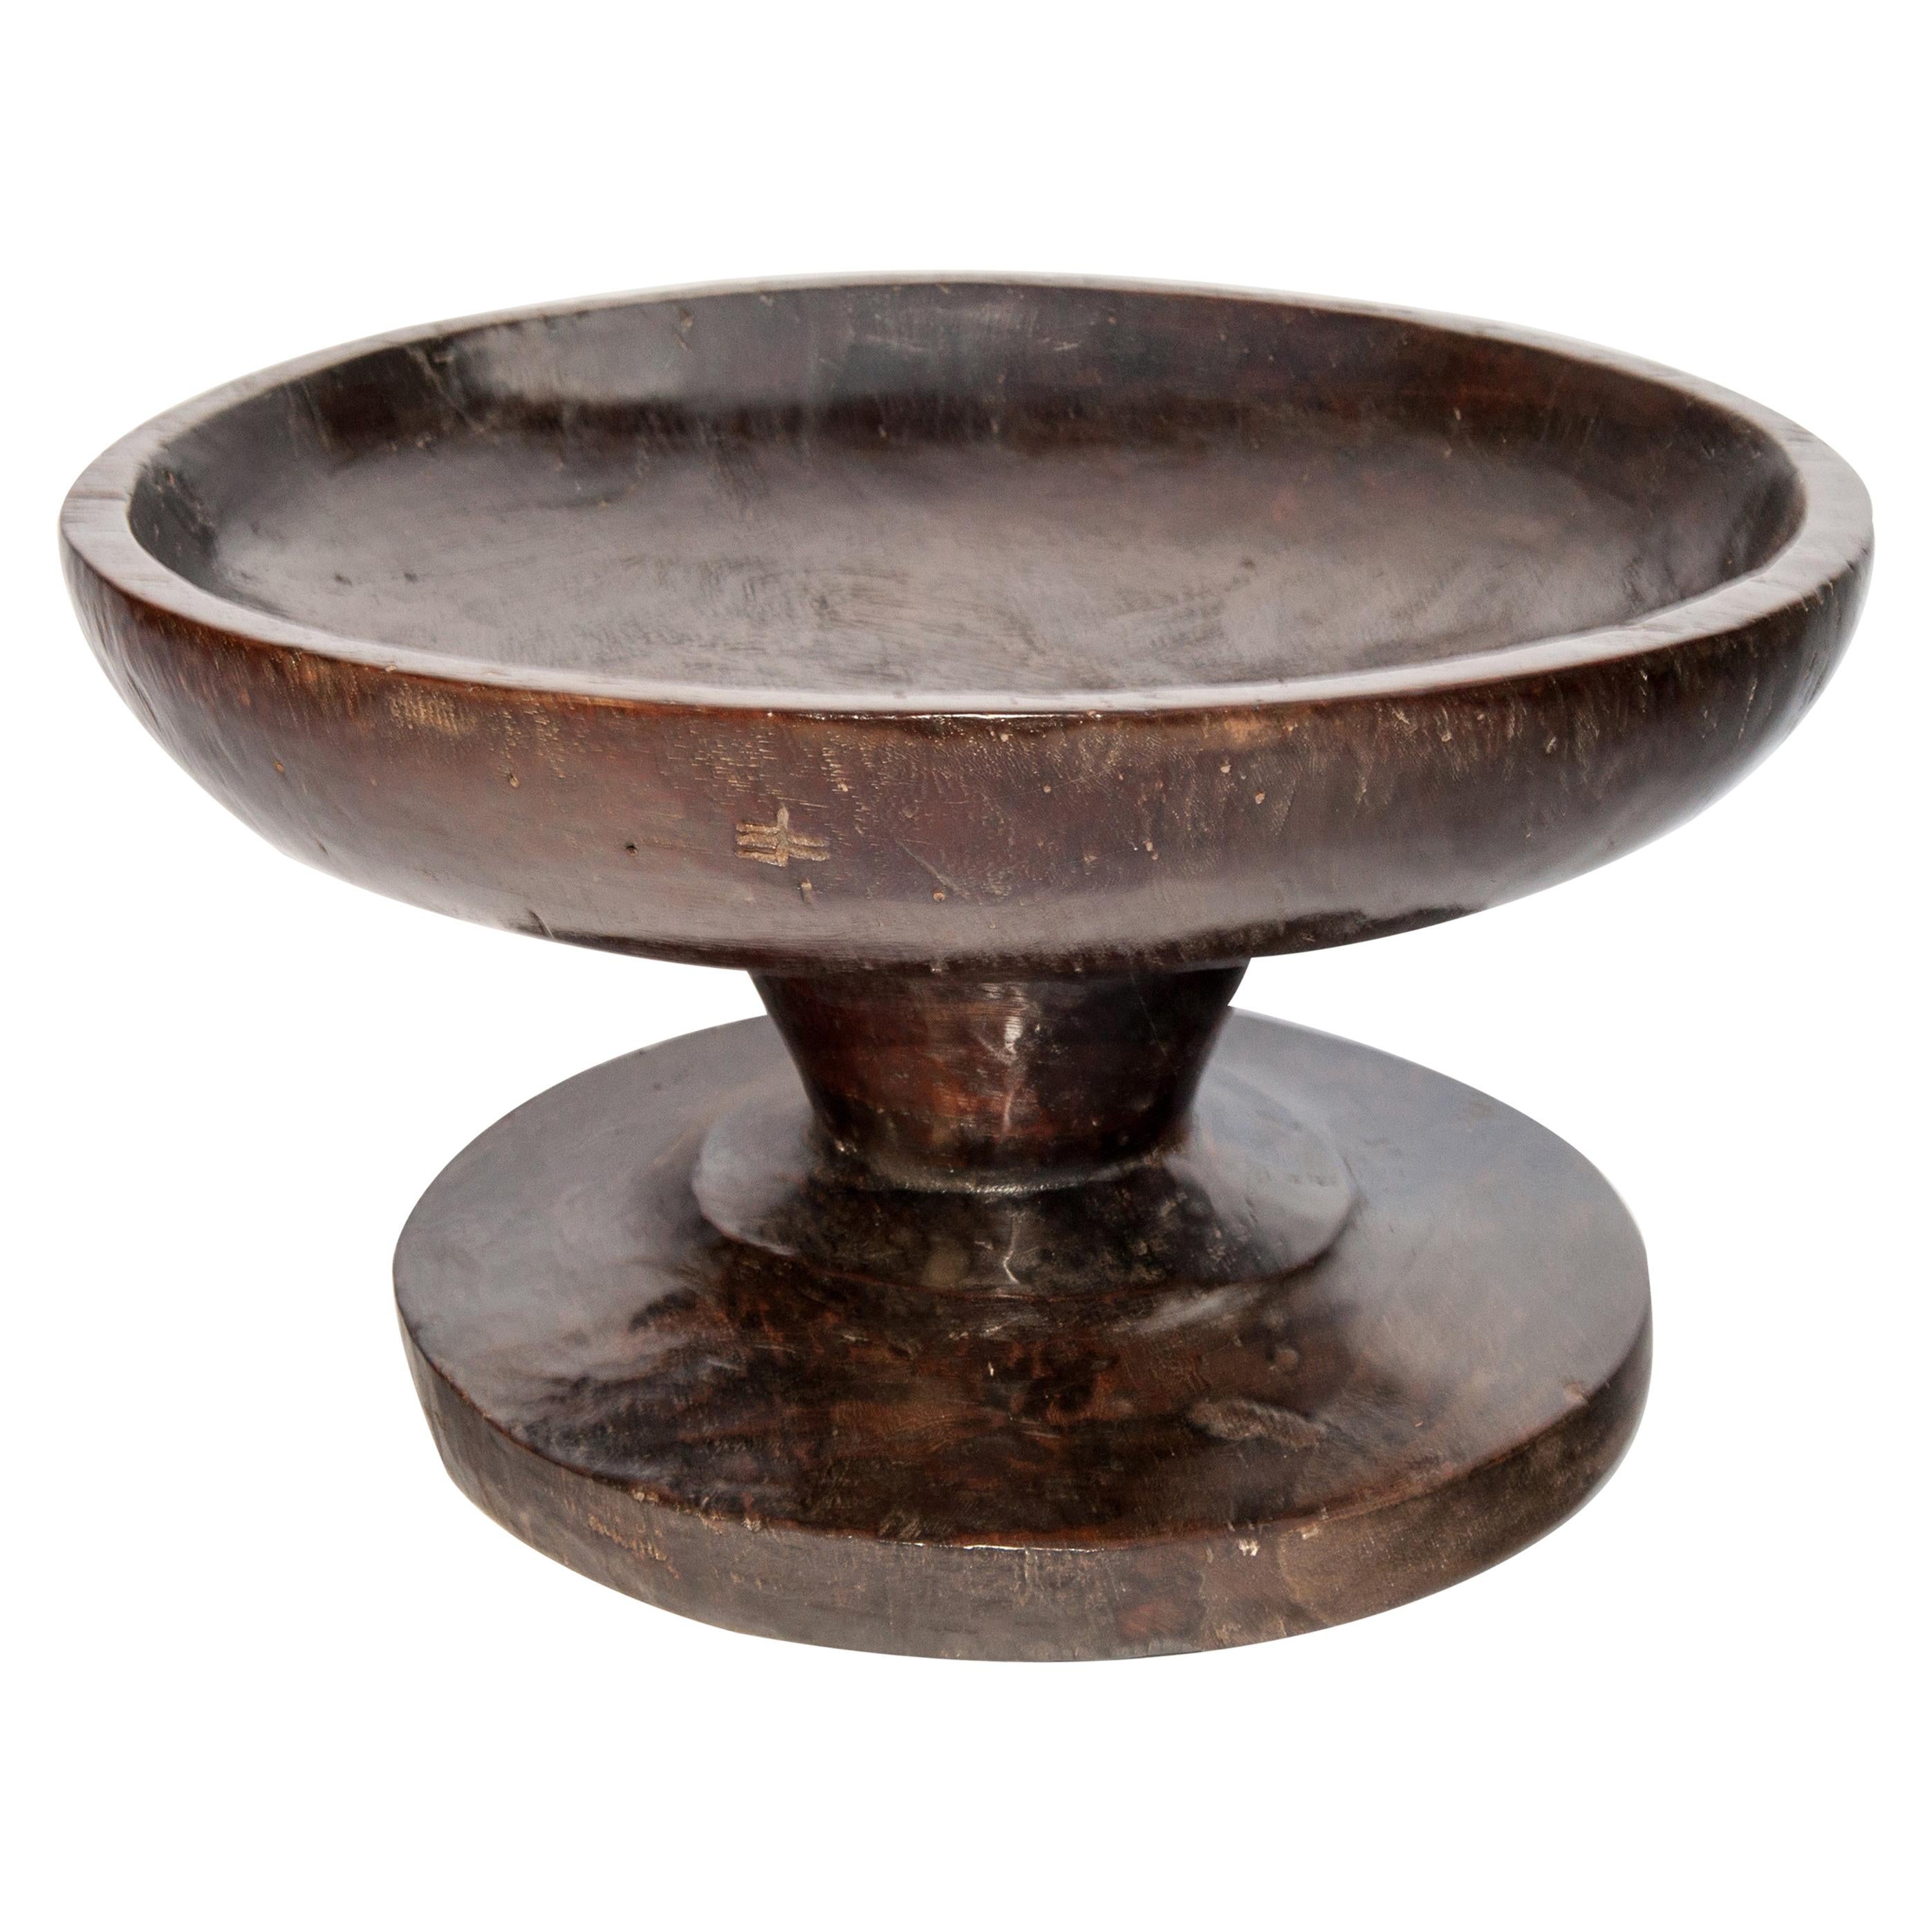 Vintage Wood Bowl on Stand from Sulawesi, Indonesia, Mid-20th Century